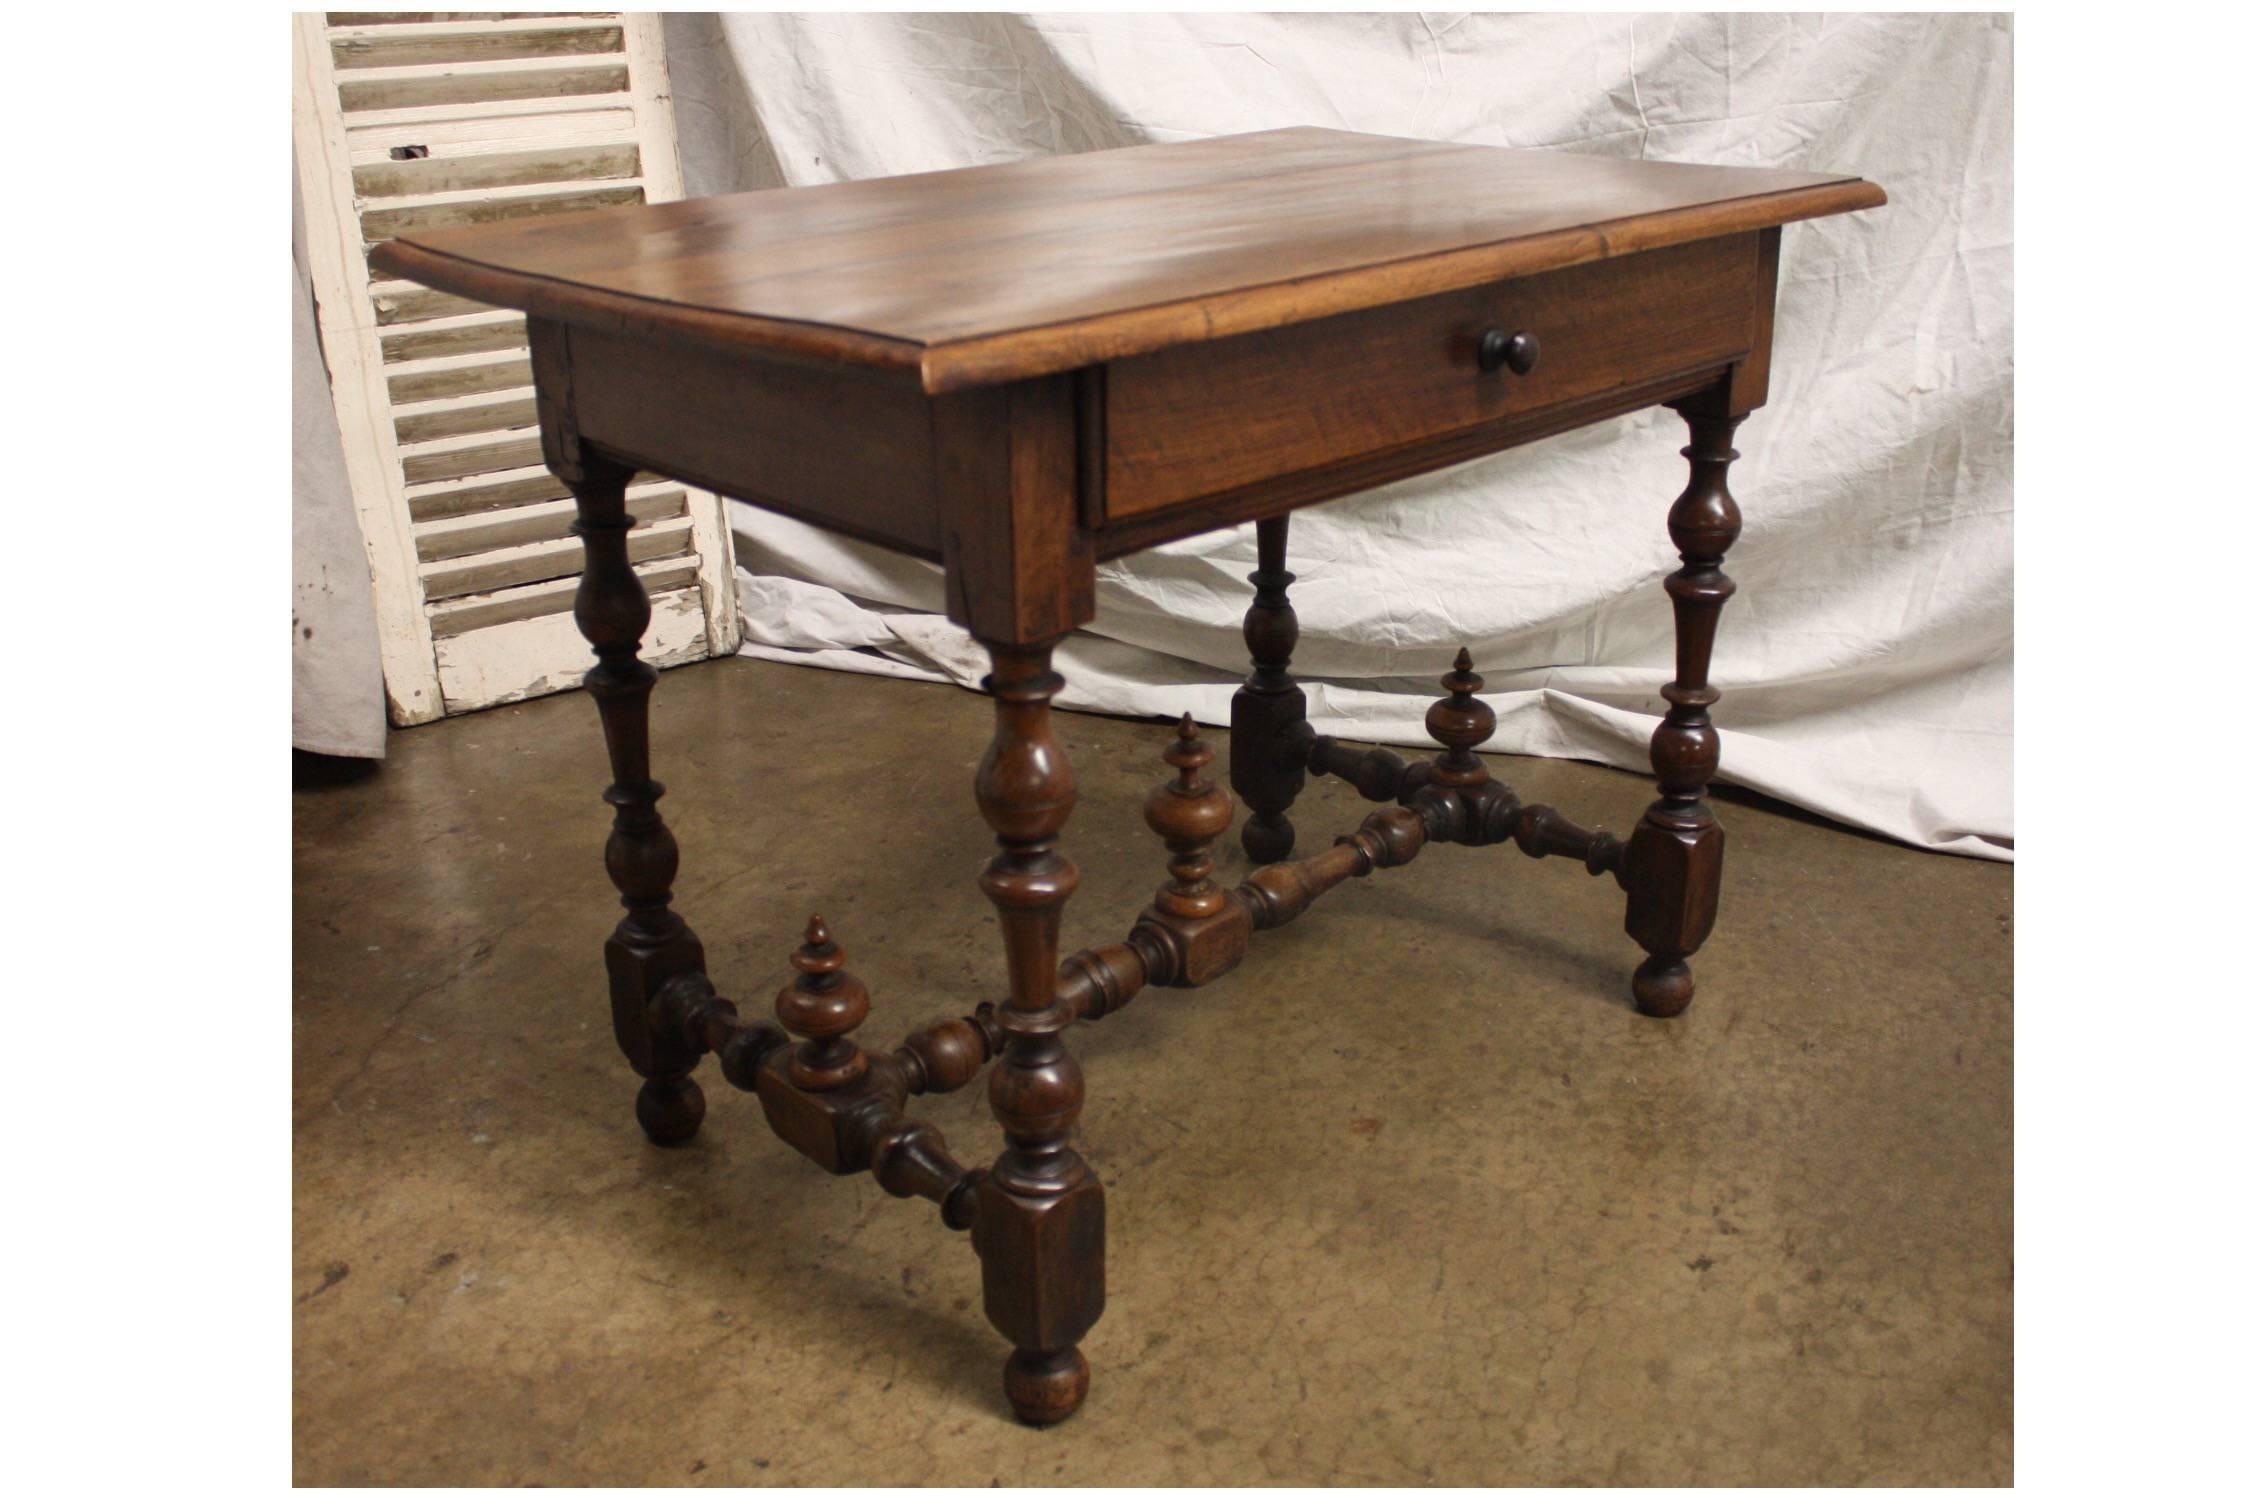 19th century French writing table.